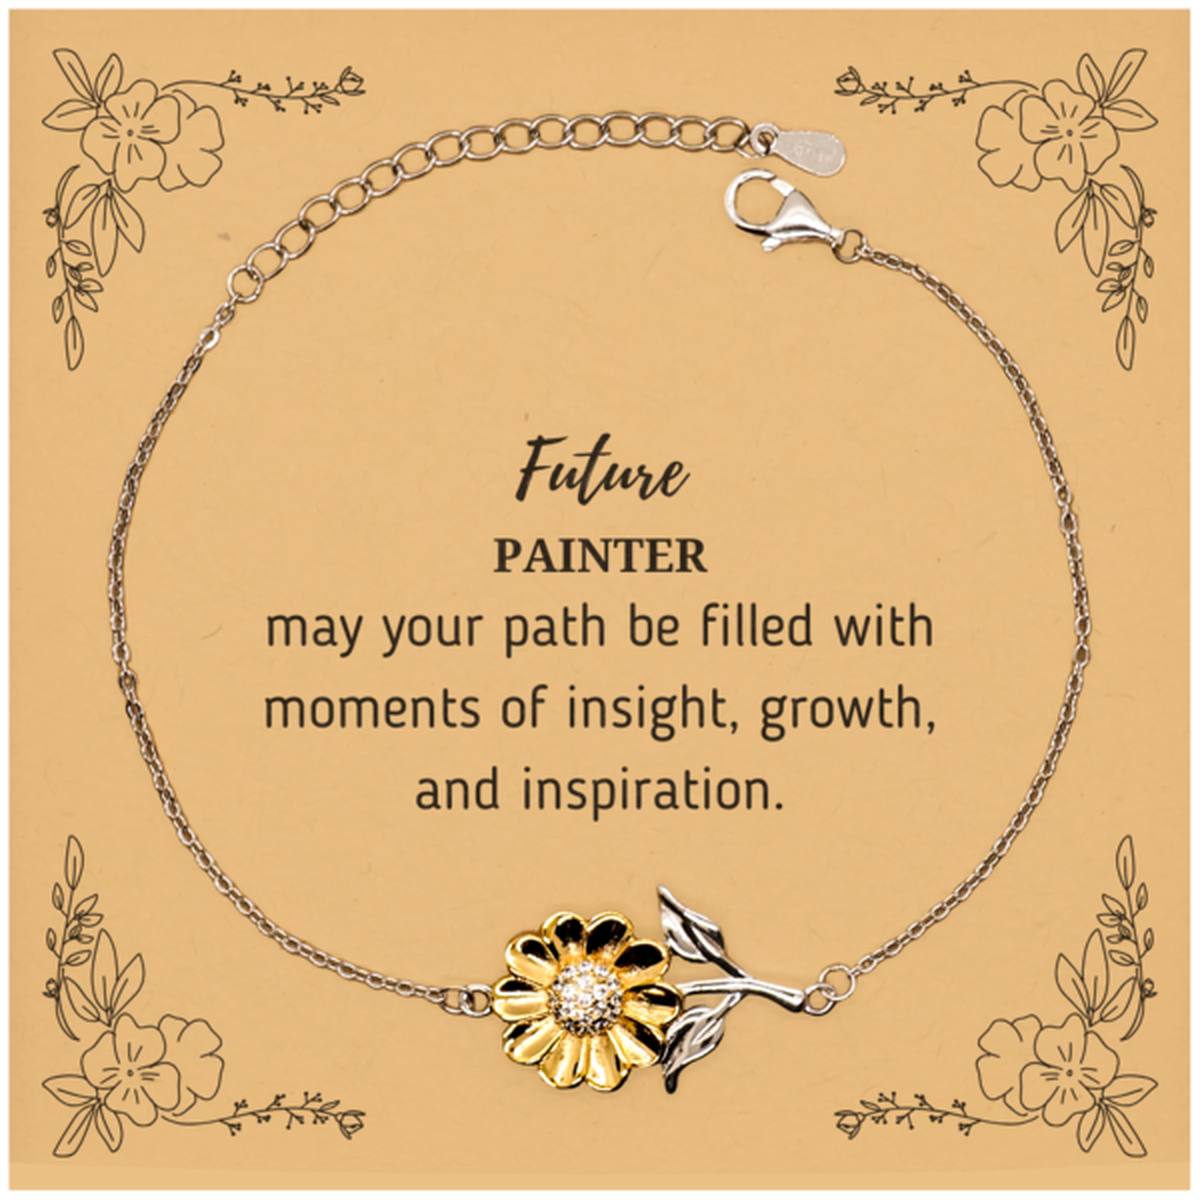 Future Painter Gifts, May your path be filled with moments of insight, Graduation Gifts for New Painter, Christmas Unique Sunflower Bracelet For Men, Women, Friends